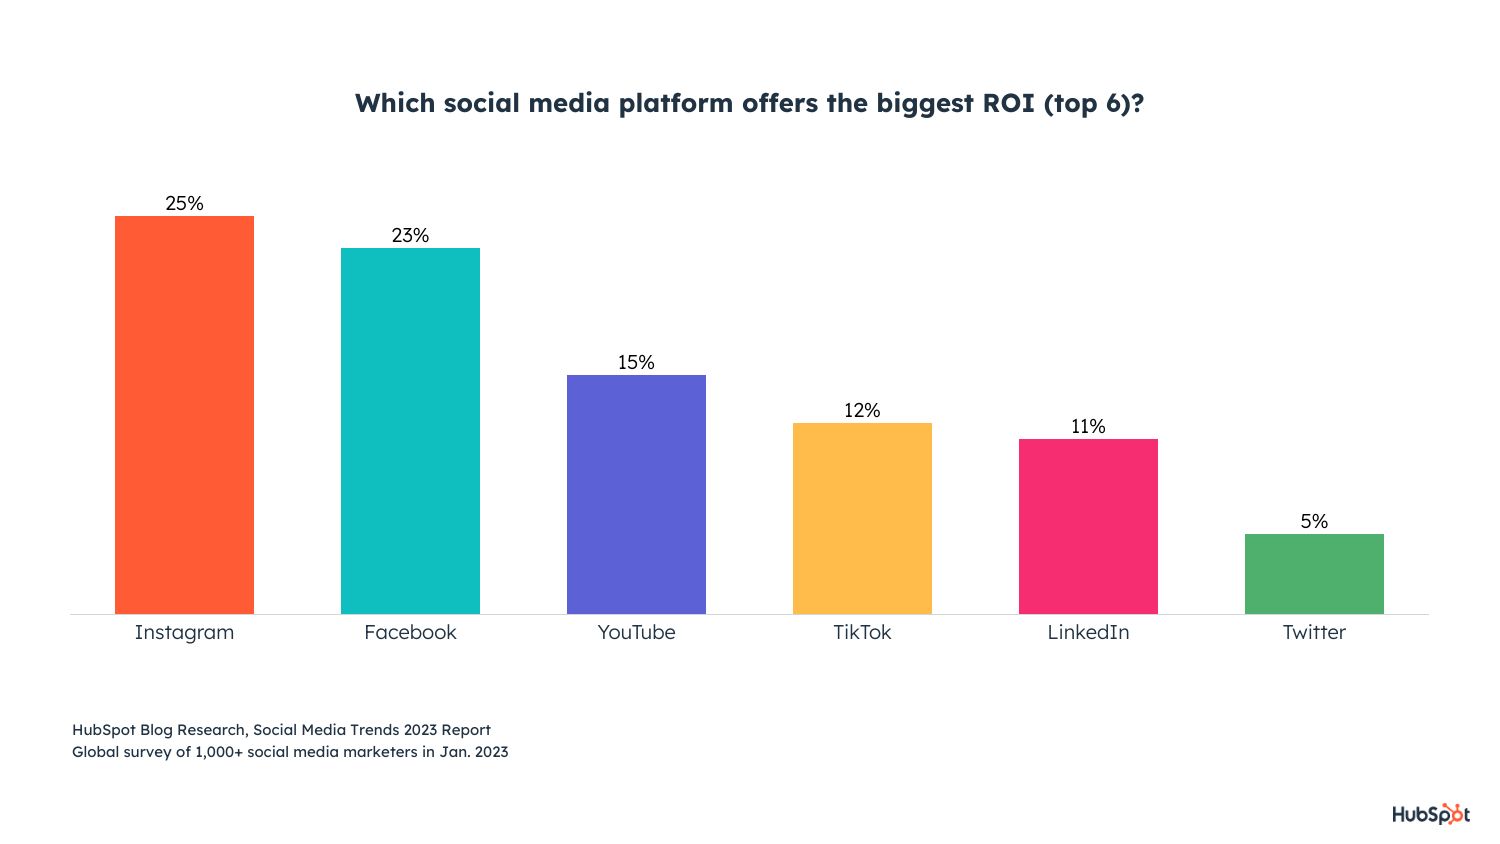 which social platform offers the biggest ROI?